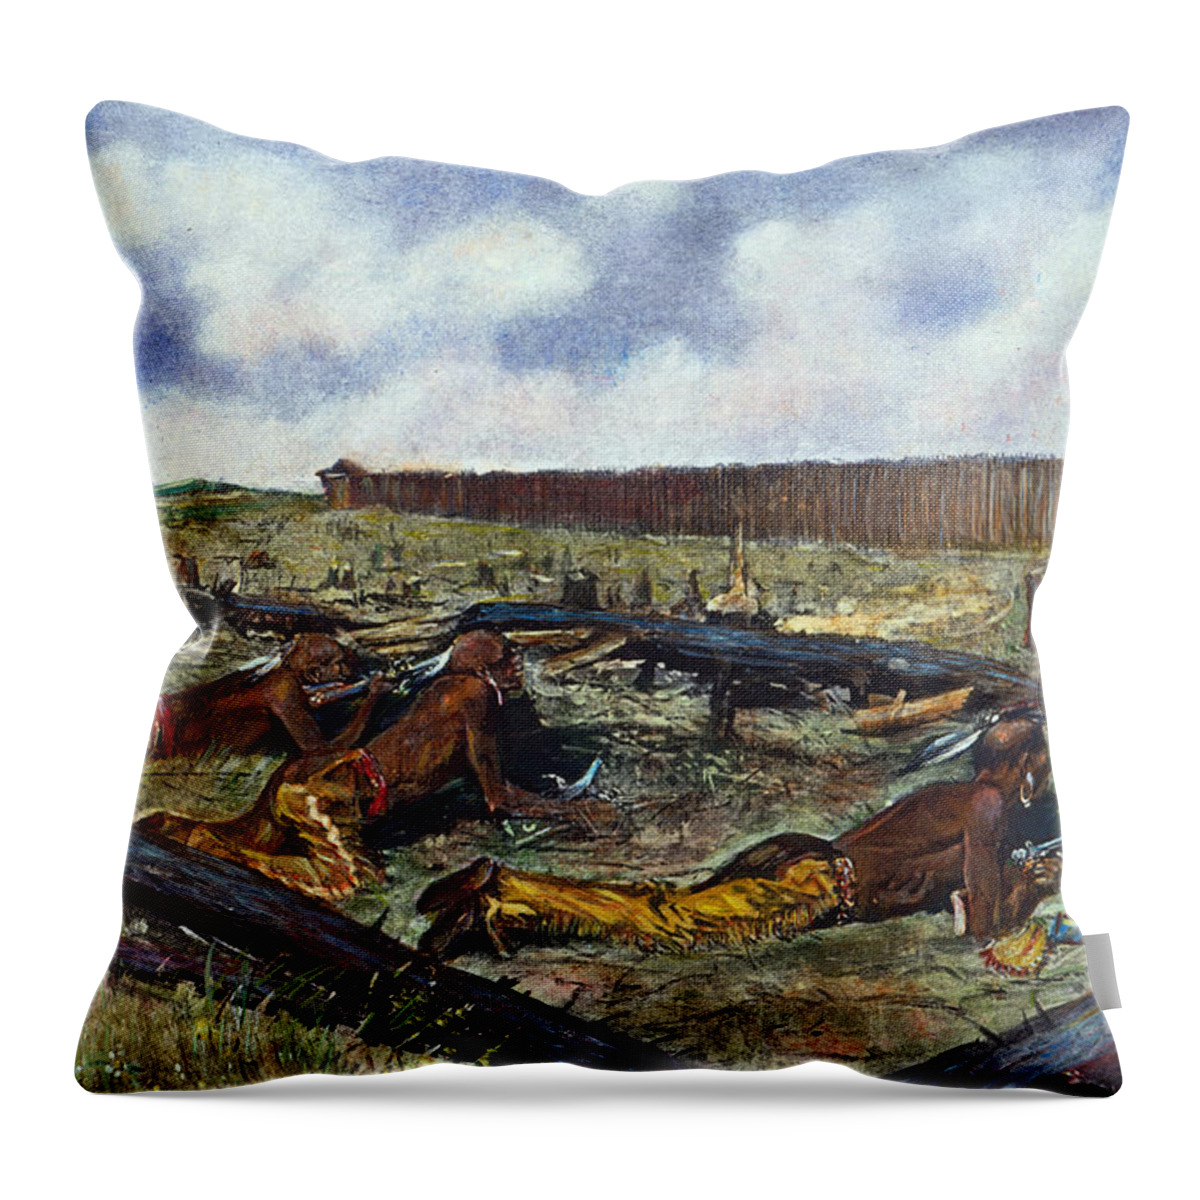 1763 Throw Pillow featuring the drawing Chief Pontiac's siege of Fort Detroit, 1763-64 by Frederic Remington